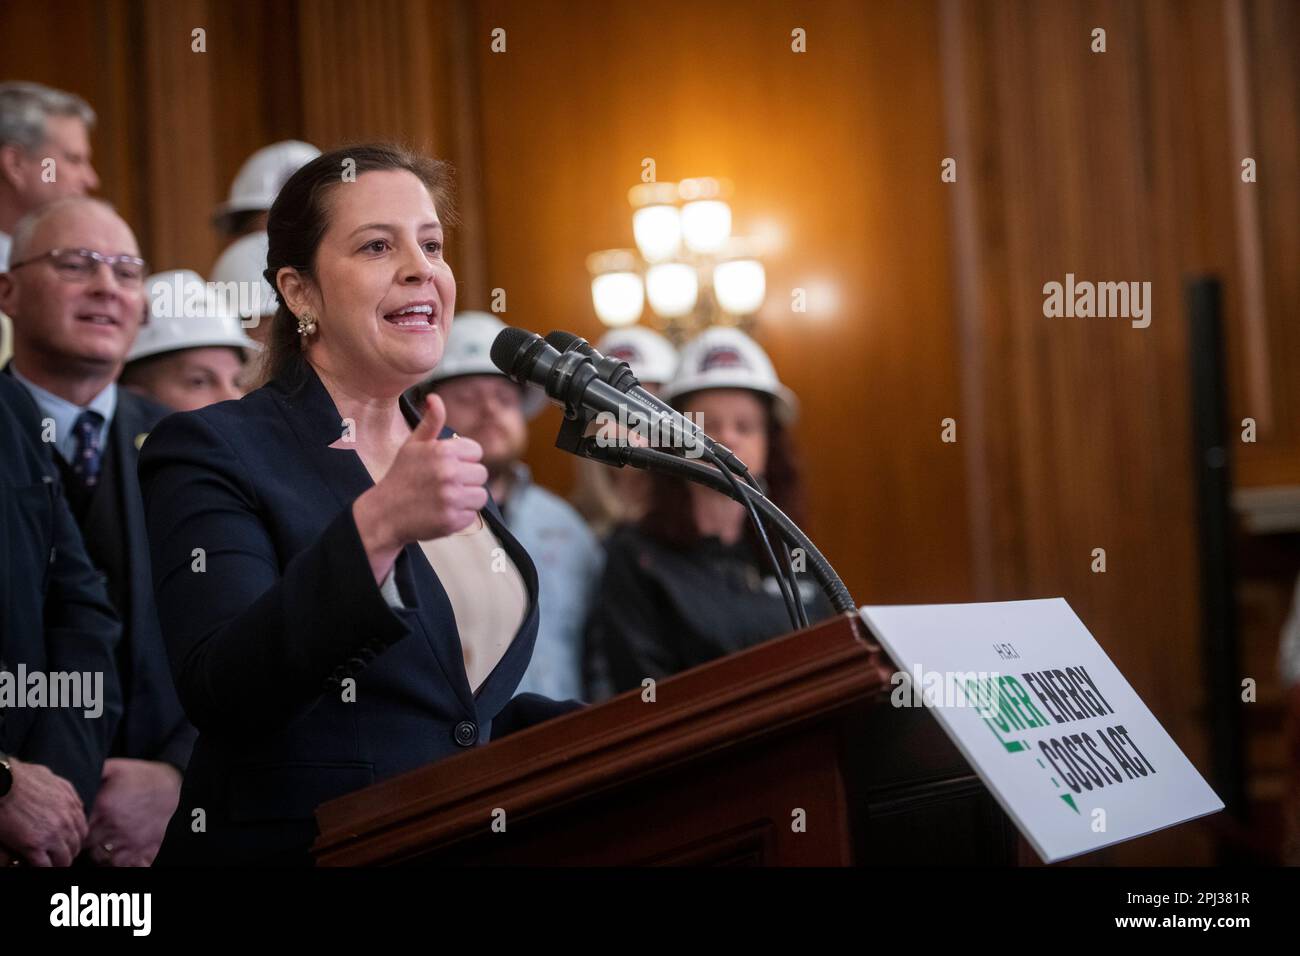 House Republican Conference Chairwoman United States Representative Elise Stefanik (Republican of New York) offers remarks during press conference post passage of H.R. 1, Lower Energy Costs Act, at the US Capitol in Washington, DC, Thursday, March 30, 2023. Credit: Rod Lamkey/CNP /MediaPunch Stock Photo